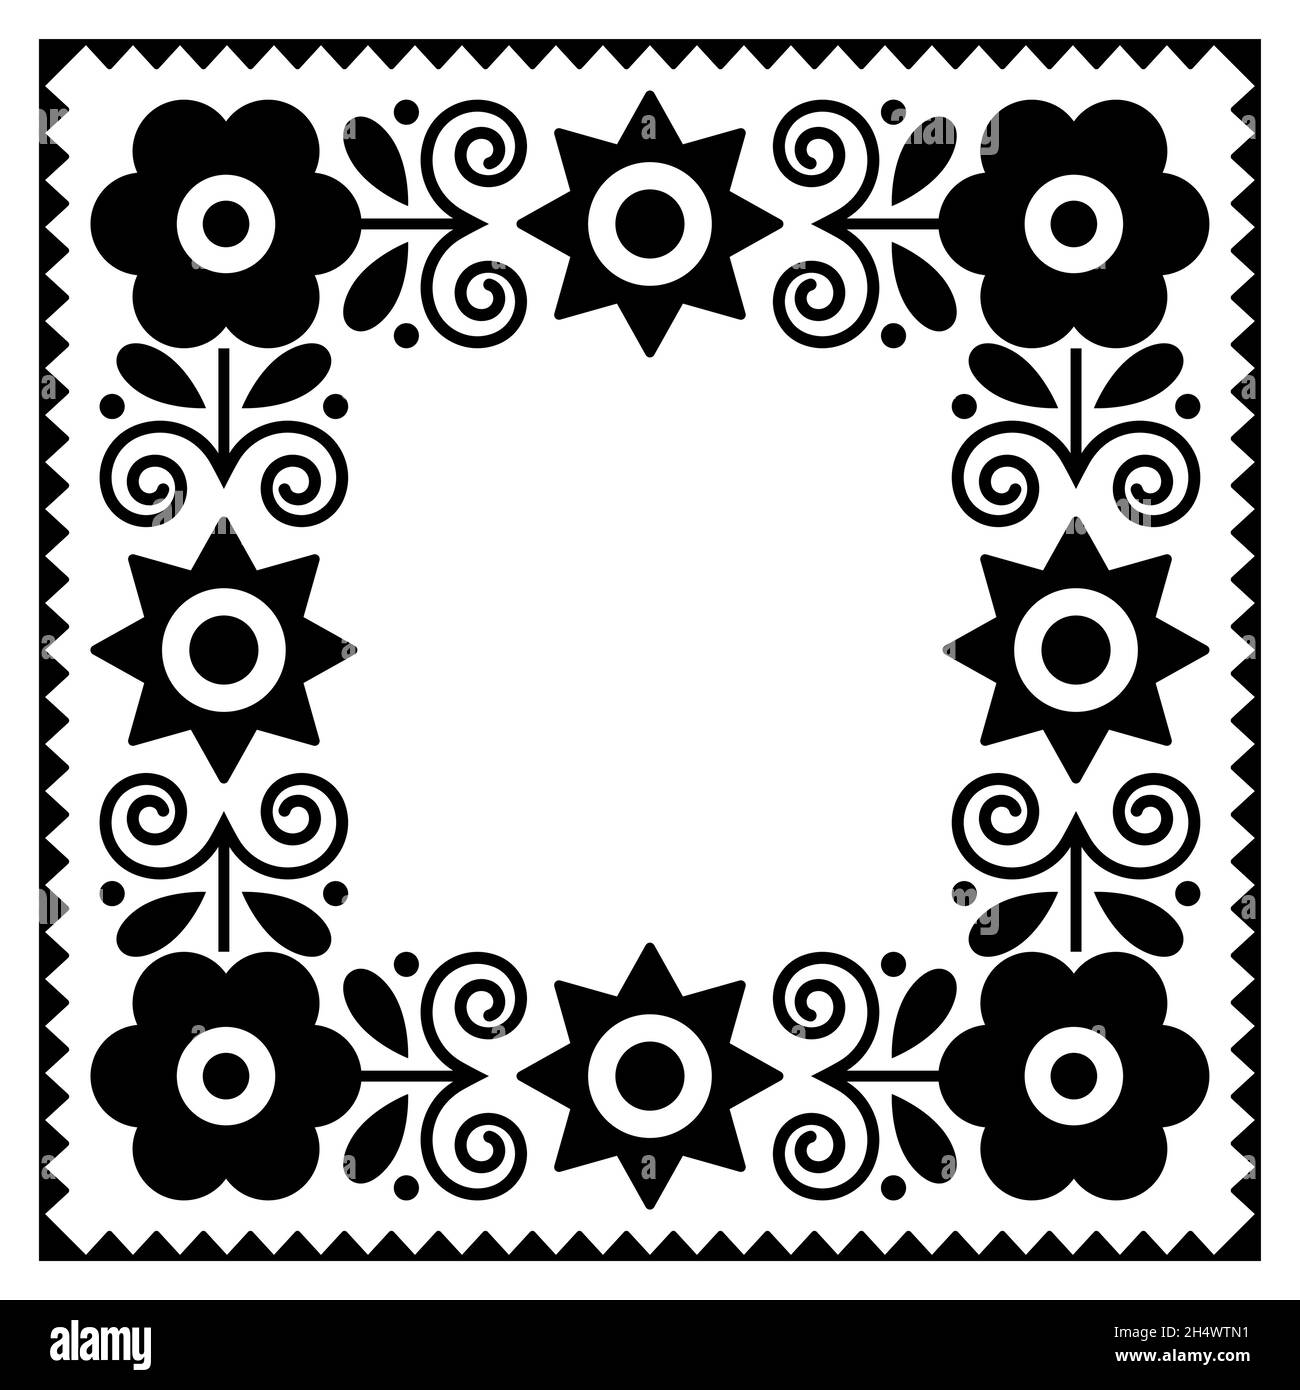 Polish traditional folk art square frame or border vector monochrome design with flowers, perfect for greeting card or wedding invitation Stock Vector